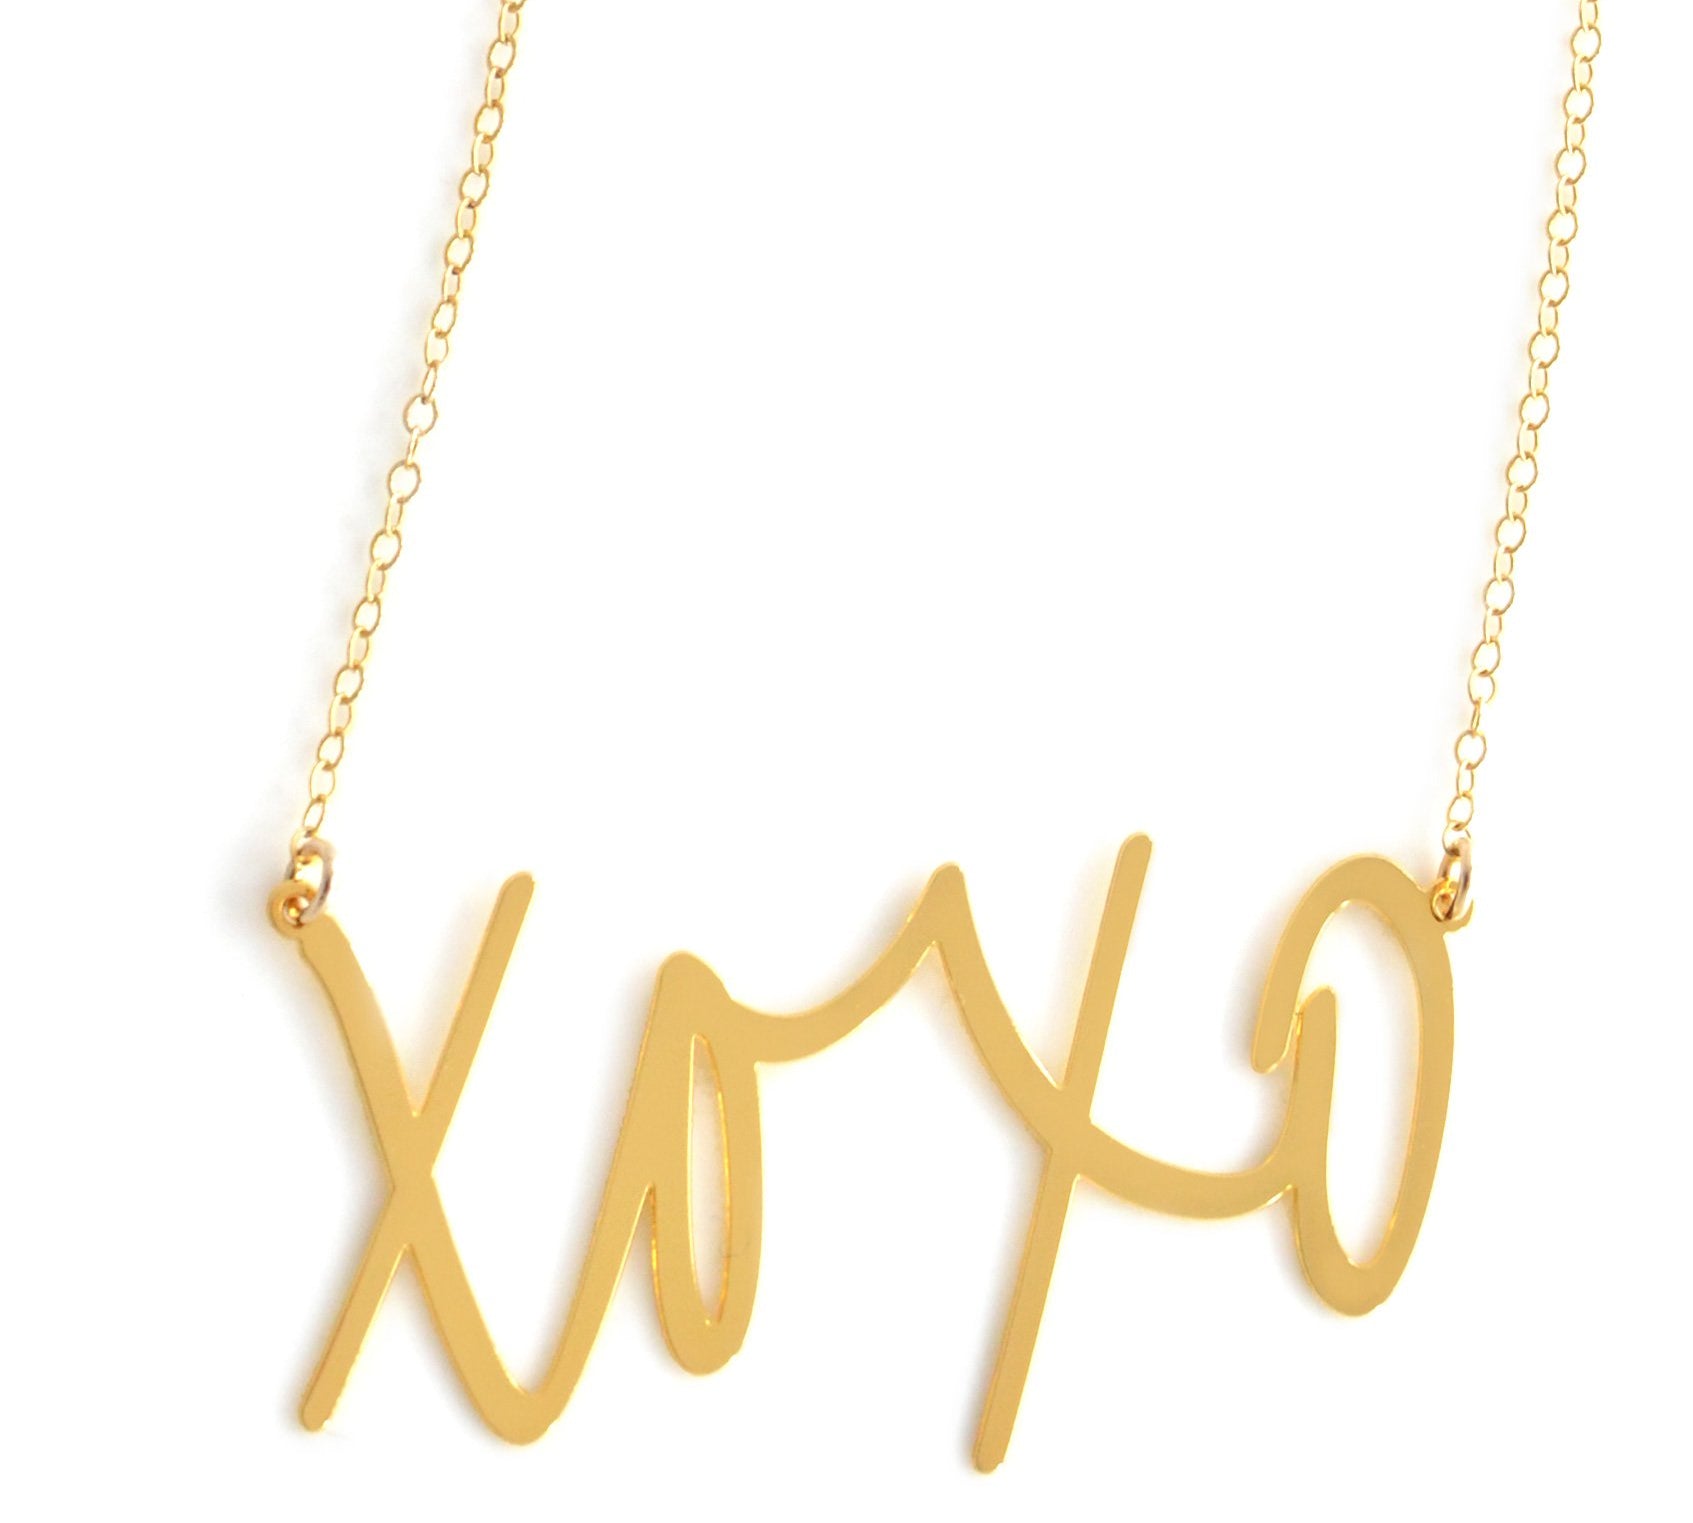 XOXO {{ product.type }} - Brevity Jewelry - Made in USA - Affordable gold and silver necklaces